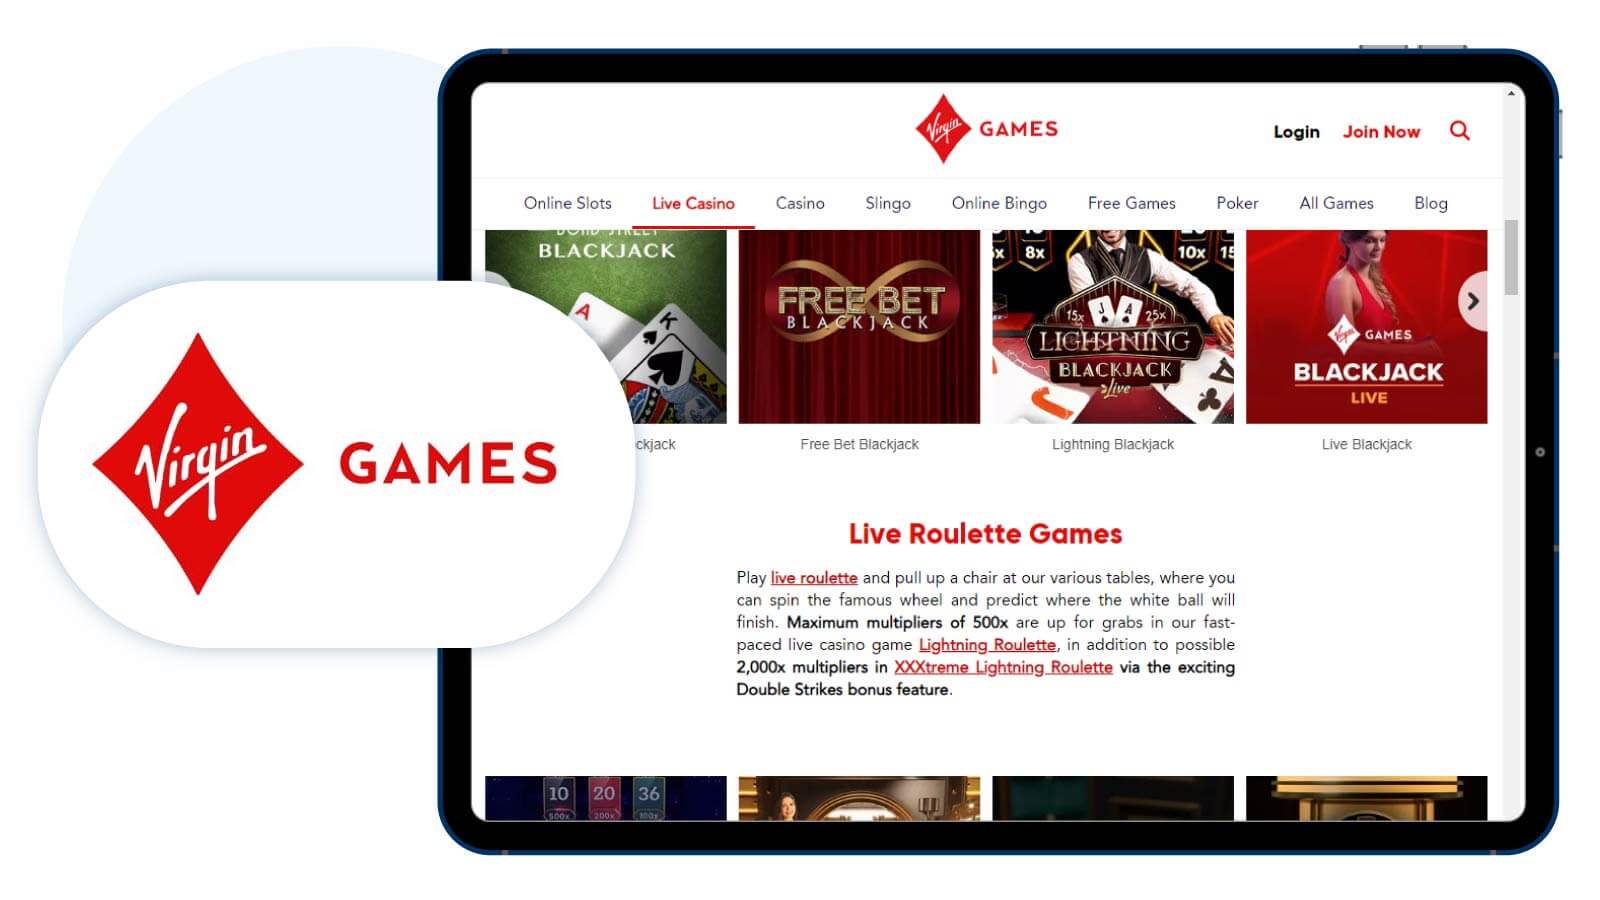 Virgin-Games-Casino-Outstanding-Evolution-Casino-with-No-Wagering-Offer